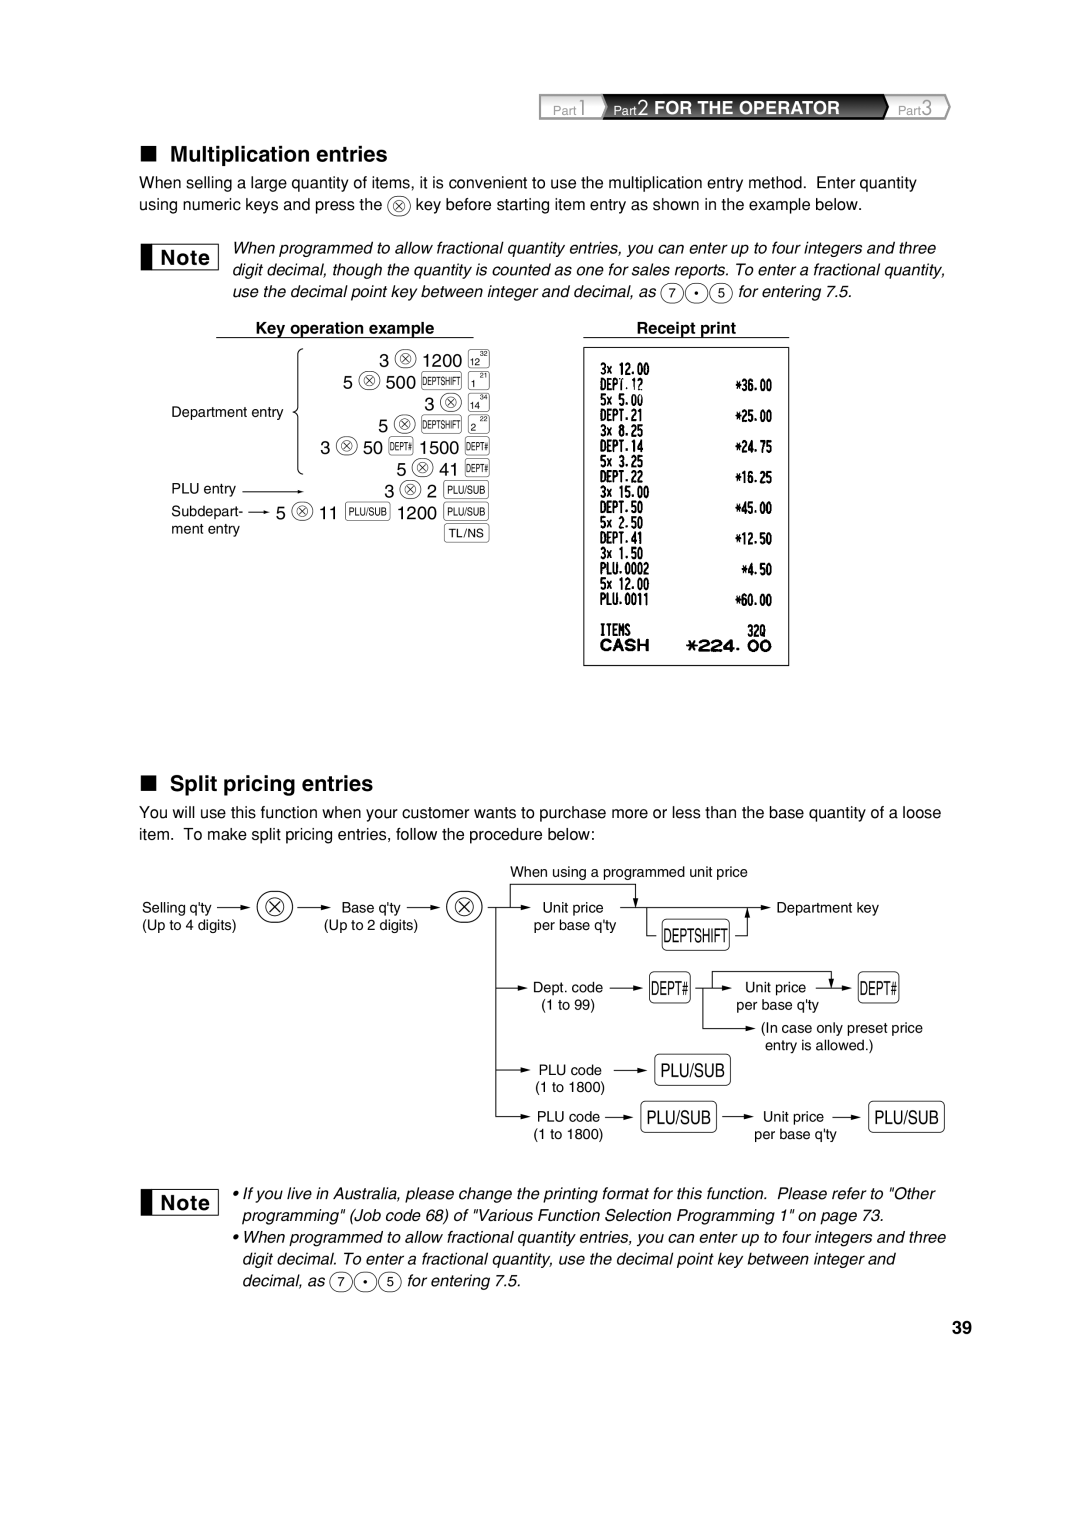 Sharp XE-A303 Multiplication entries, Split pricing entries, Part 1 Part 2 FOR THE OPERATOR, 3 @1200 ∑, 5 @500 D¡, 5 @41 d 